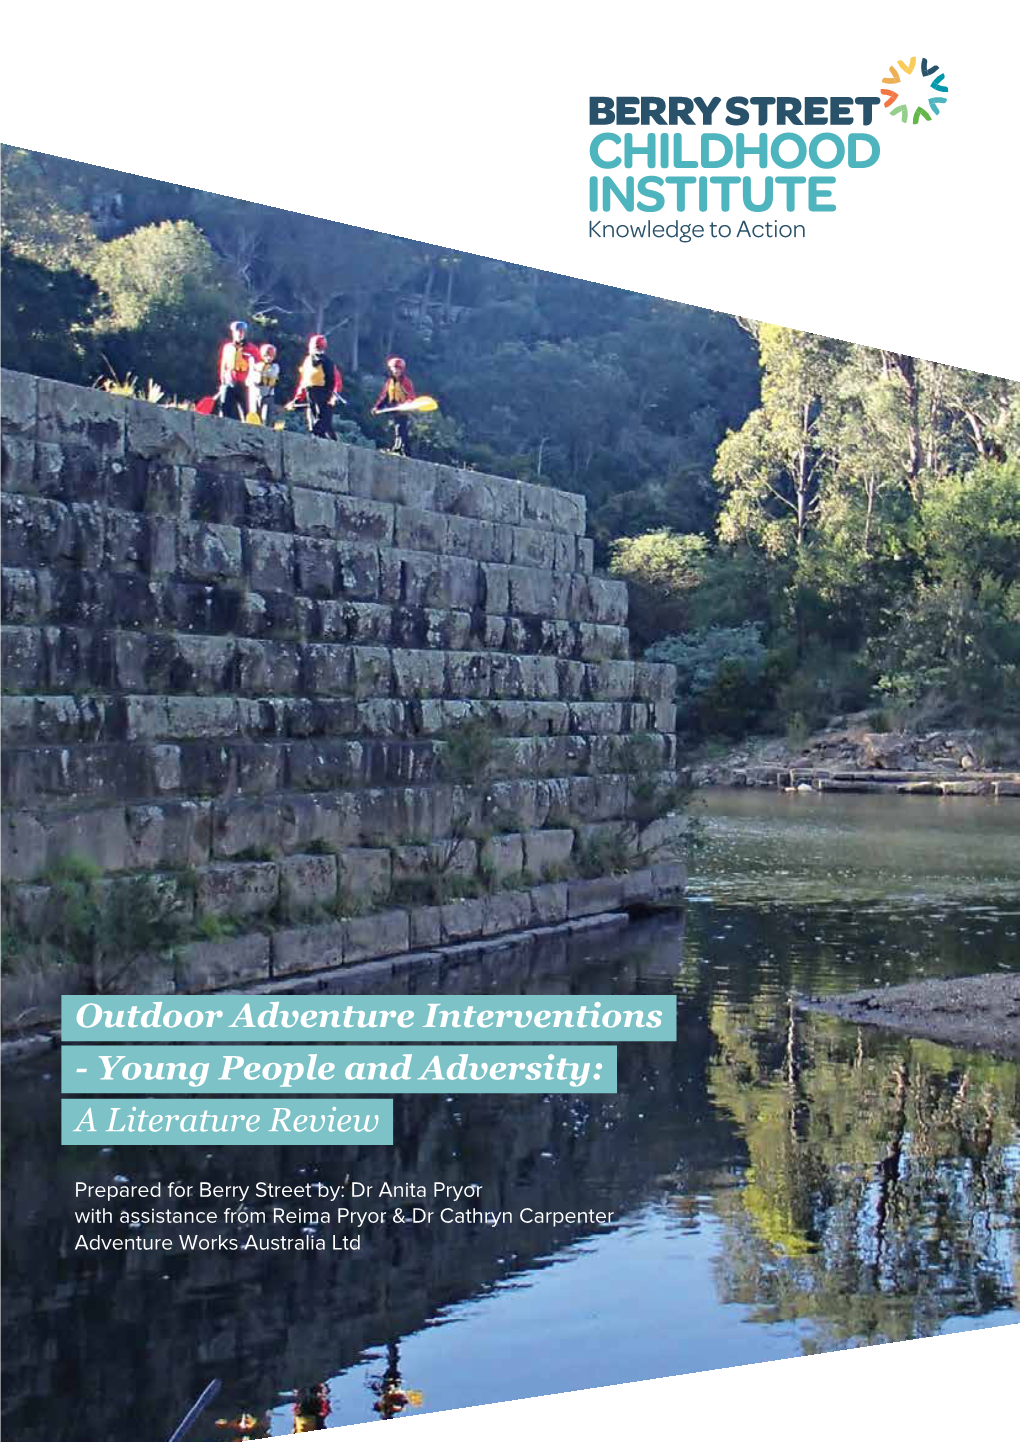 Outdoor Adventure Interventions - Young People and Adversity: a Literature Review